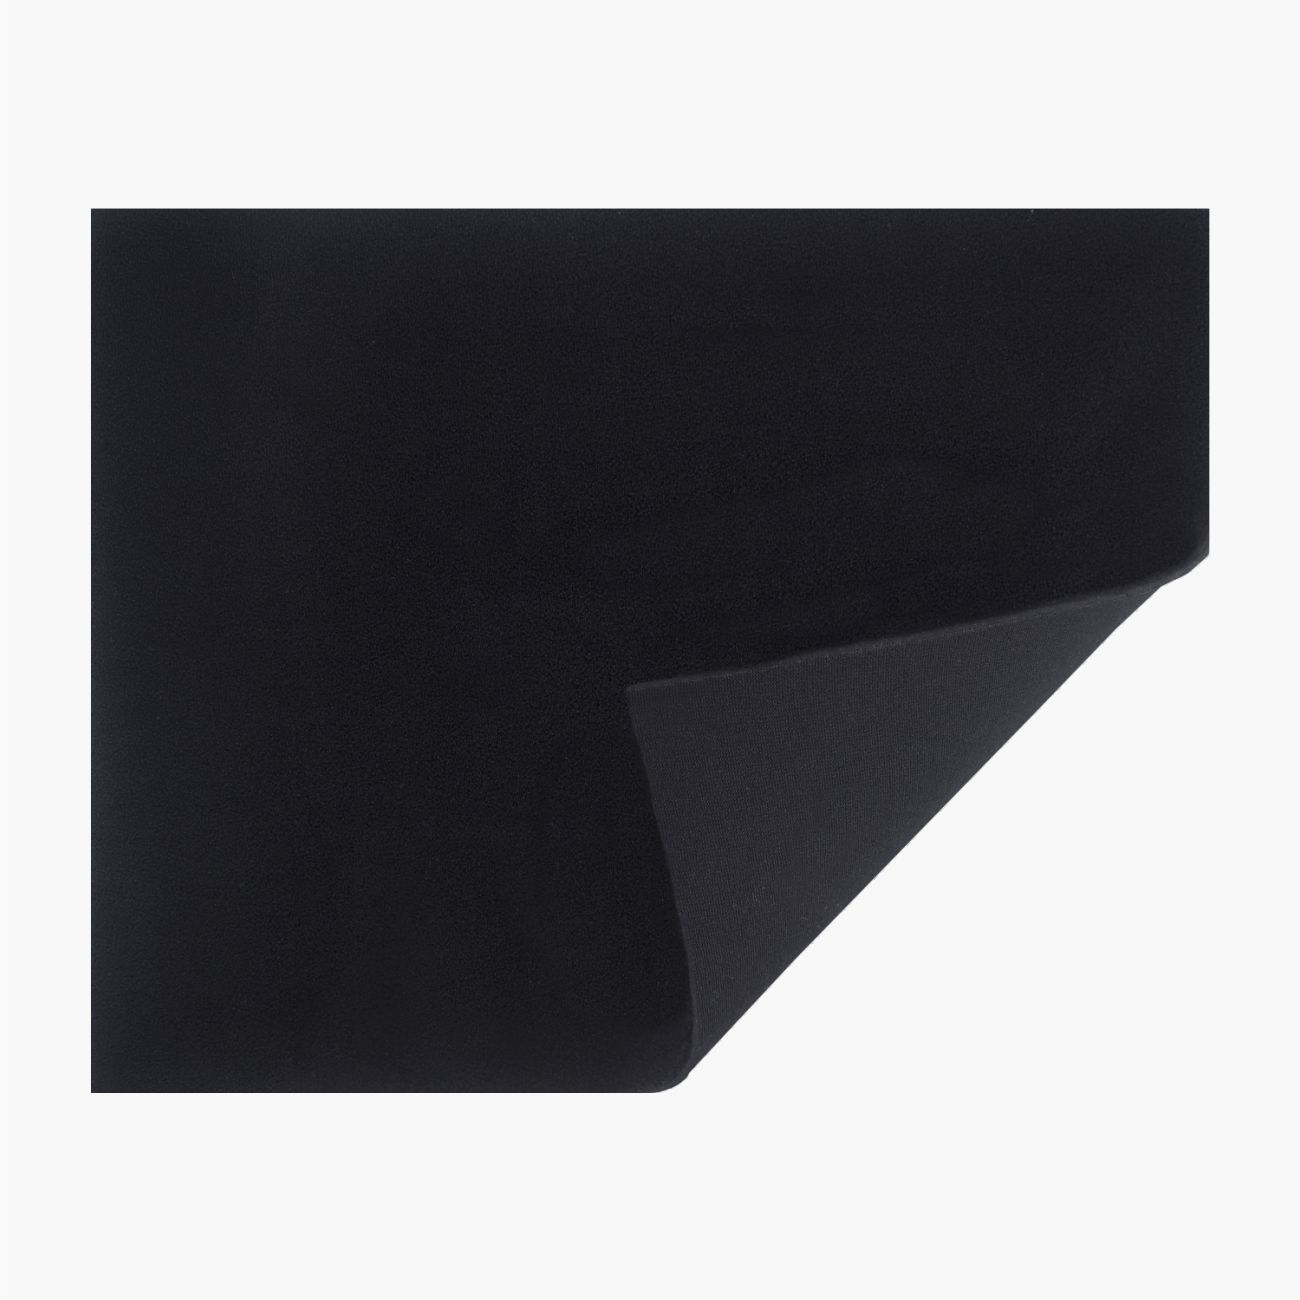 SMALL Neoprene Sheets 3mm Double Lined 230mm x 300mm - BLACK - VELCRO  COMPATIBLE | Lomo Watersport UK. Wetsuits, Dry Bags & Outdoor Gear.